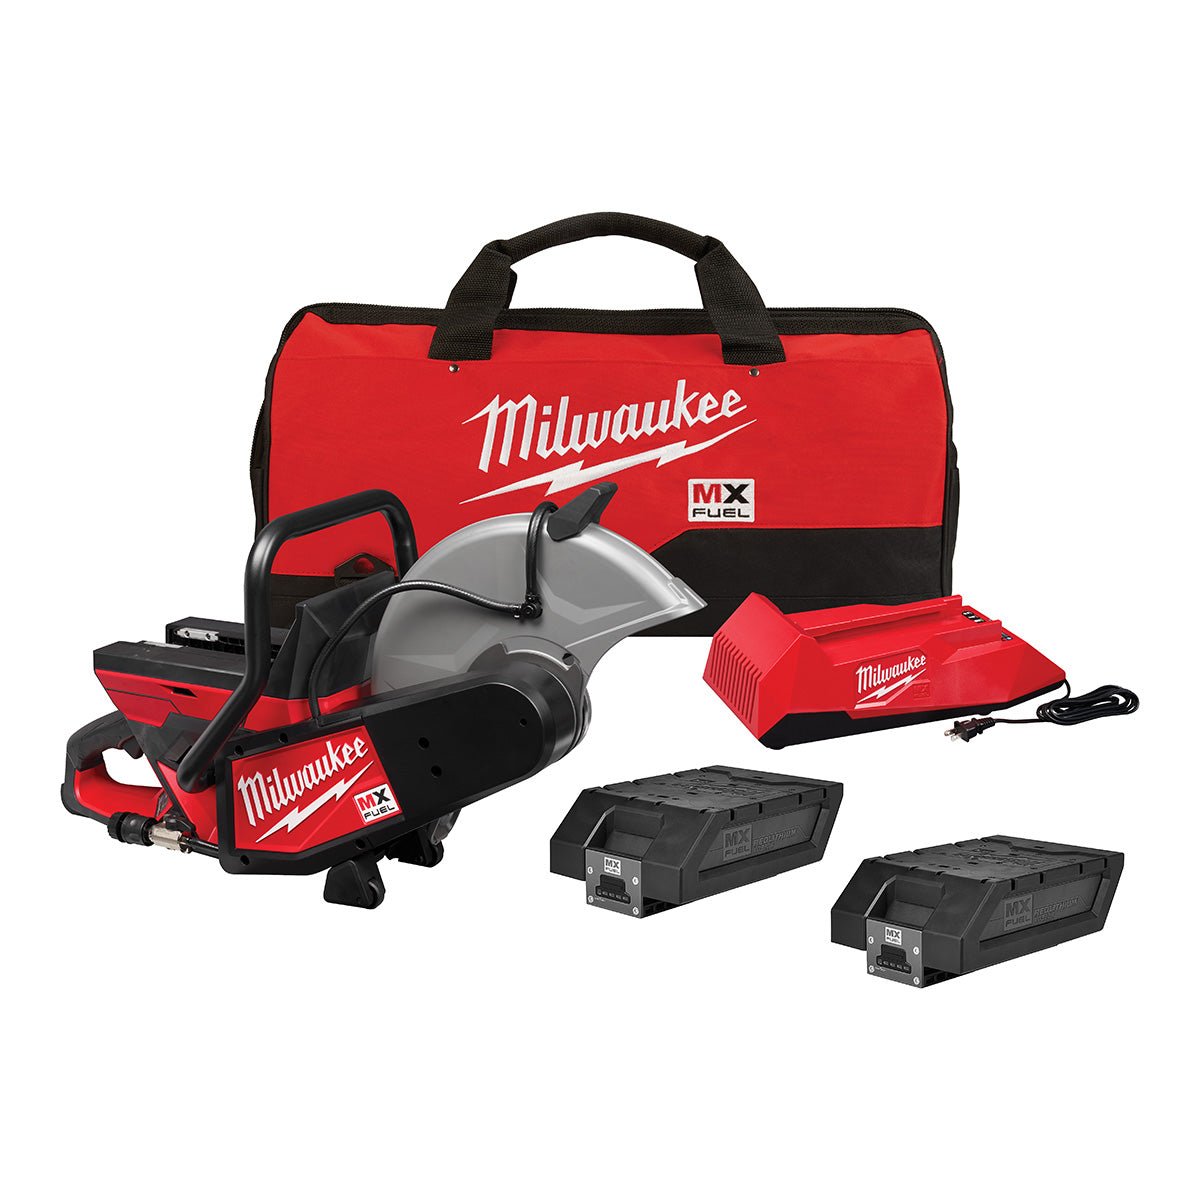 Milwaukee MXF314-2XC MX FUEL Cordless Brushless 14" Cut-Off Saw Kit with 2x XC406 Batteries & MX FUEL Charger